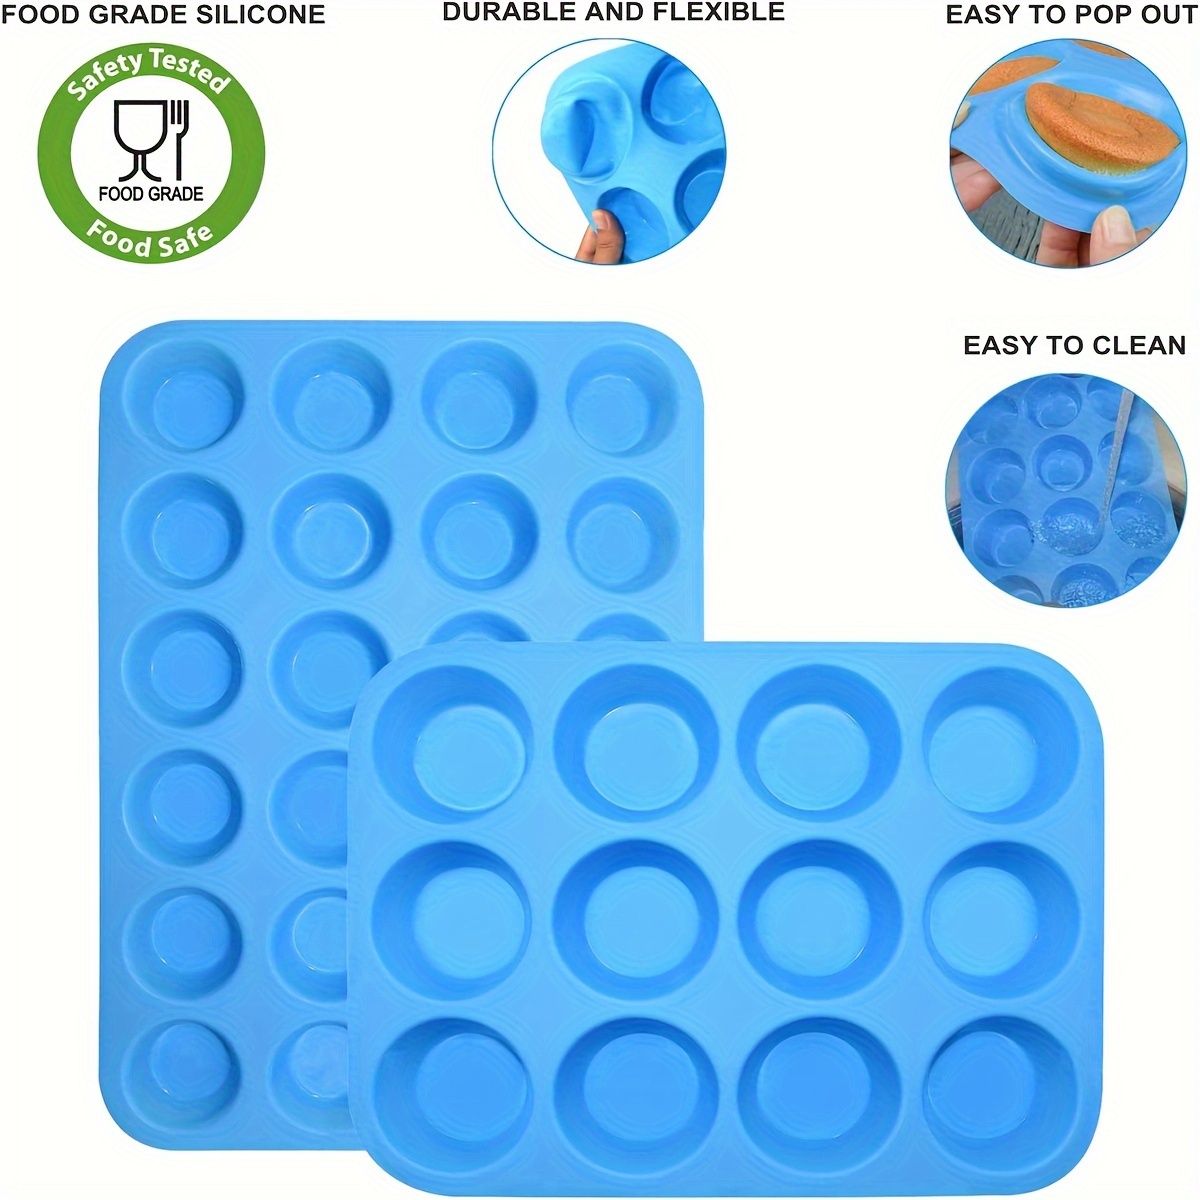 Silicone Muffin Pan Set – Non-Stick Bakeware Muffin Pan 12-Cup & Mini  Muffin Pan 24-Cup,Silicone Baking Molds for Muffins, Cupcakes, Cupcake Pan  with 1 Silicone Spatula & 1 Oil Brush